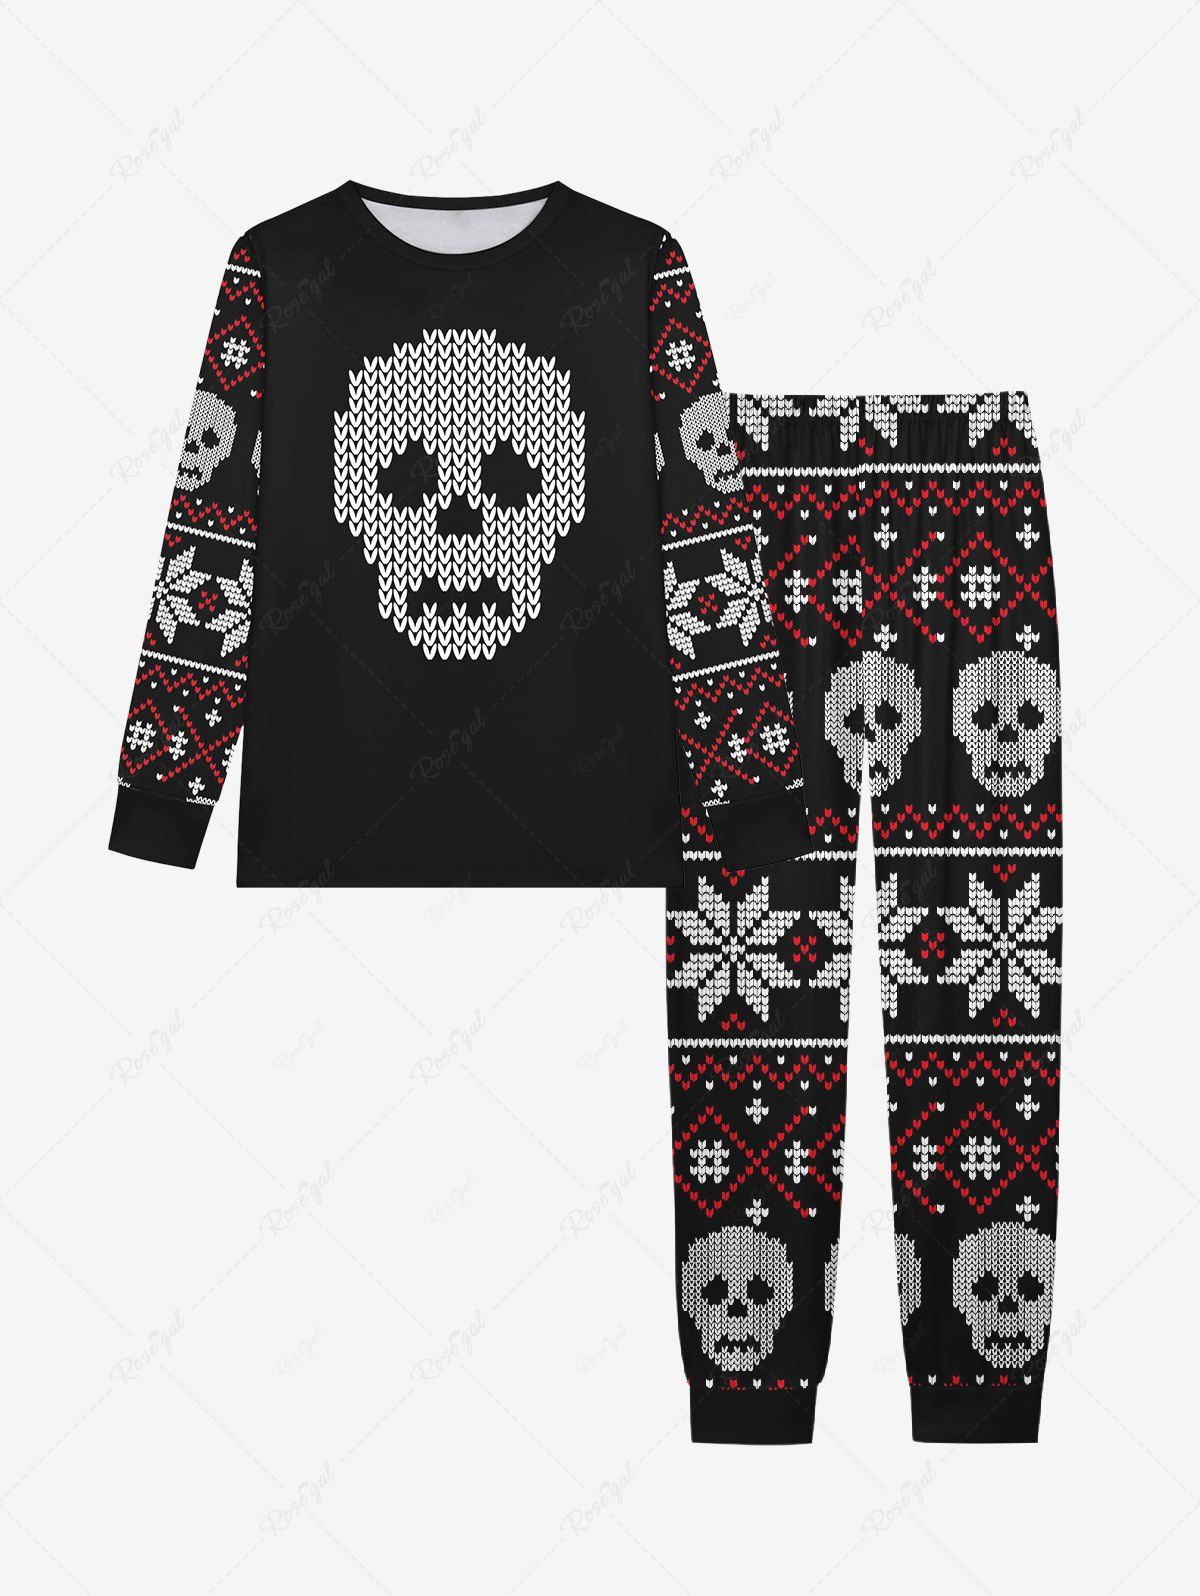 Unique Gothic Christmas Snowflake Skulls Knitted 3D Print T-shirt and Jogger Pants Pajama Set For Men  